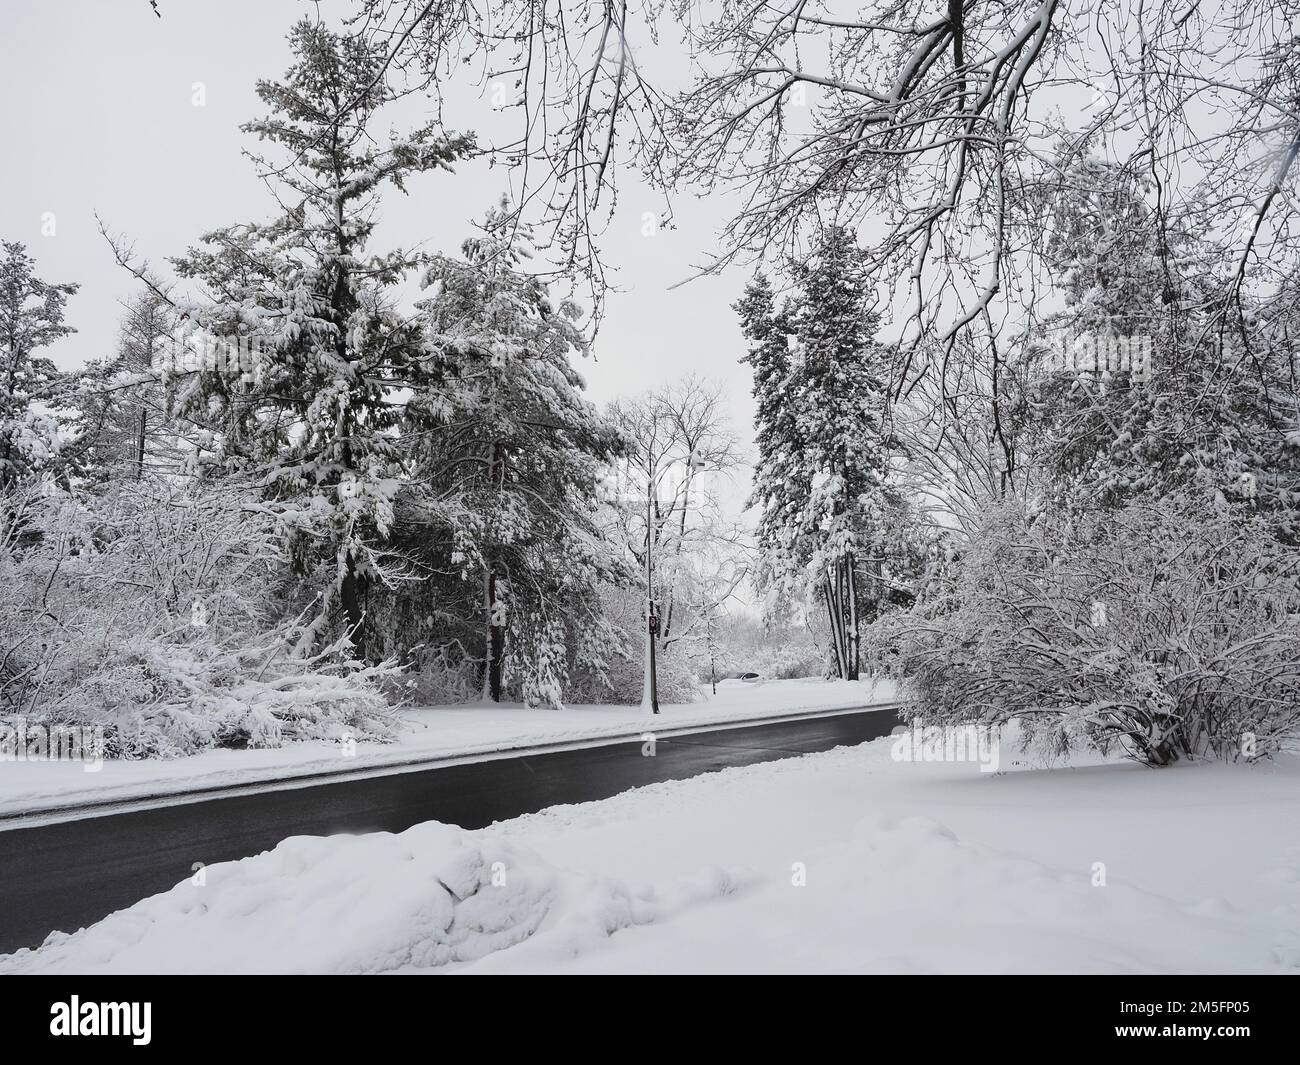 Canadian snow scene the week before Christmas. Snow covered trees and bushes line both sides of a road. Stock Photo